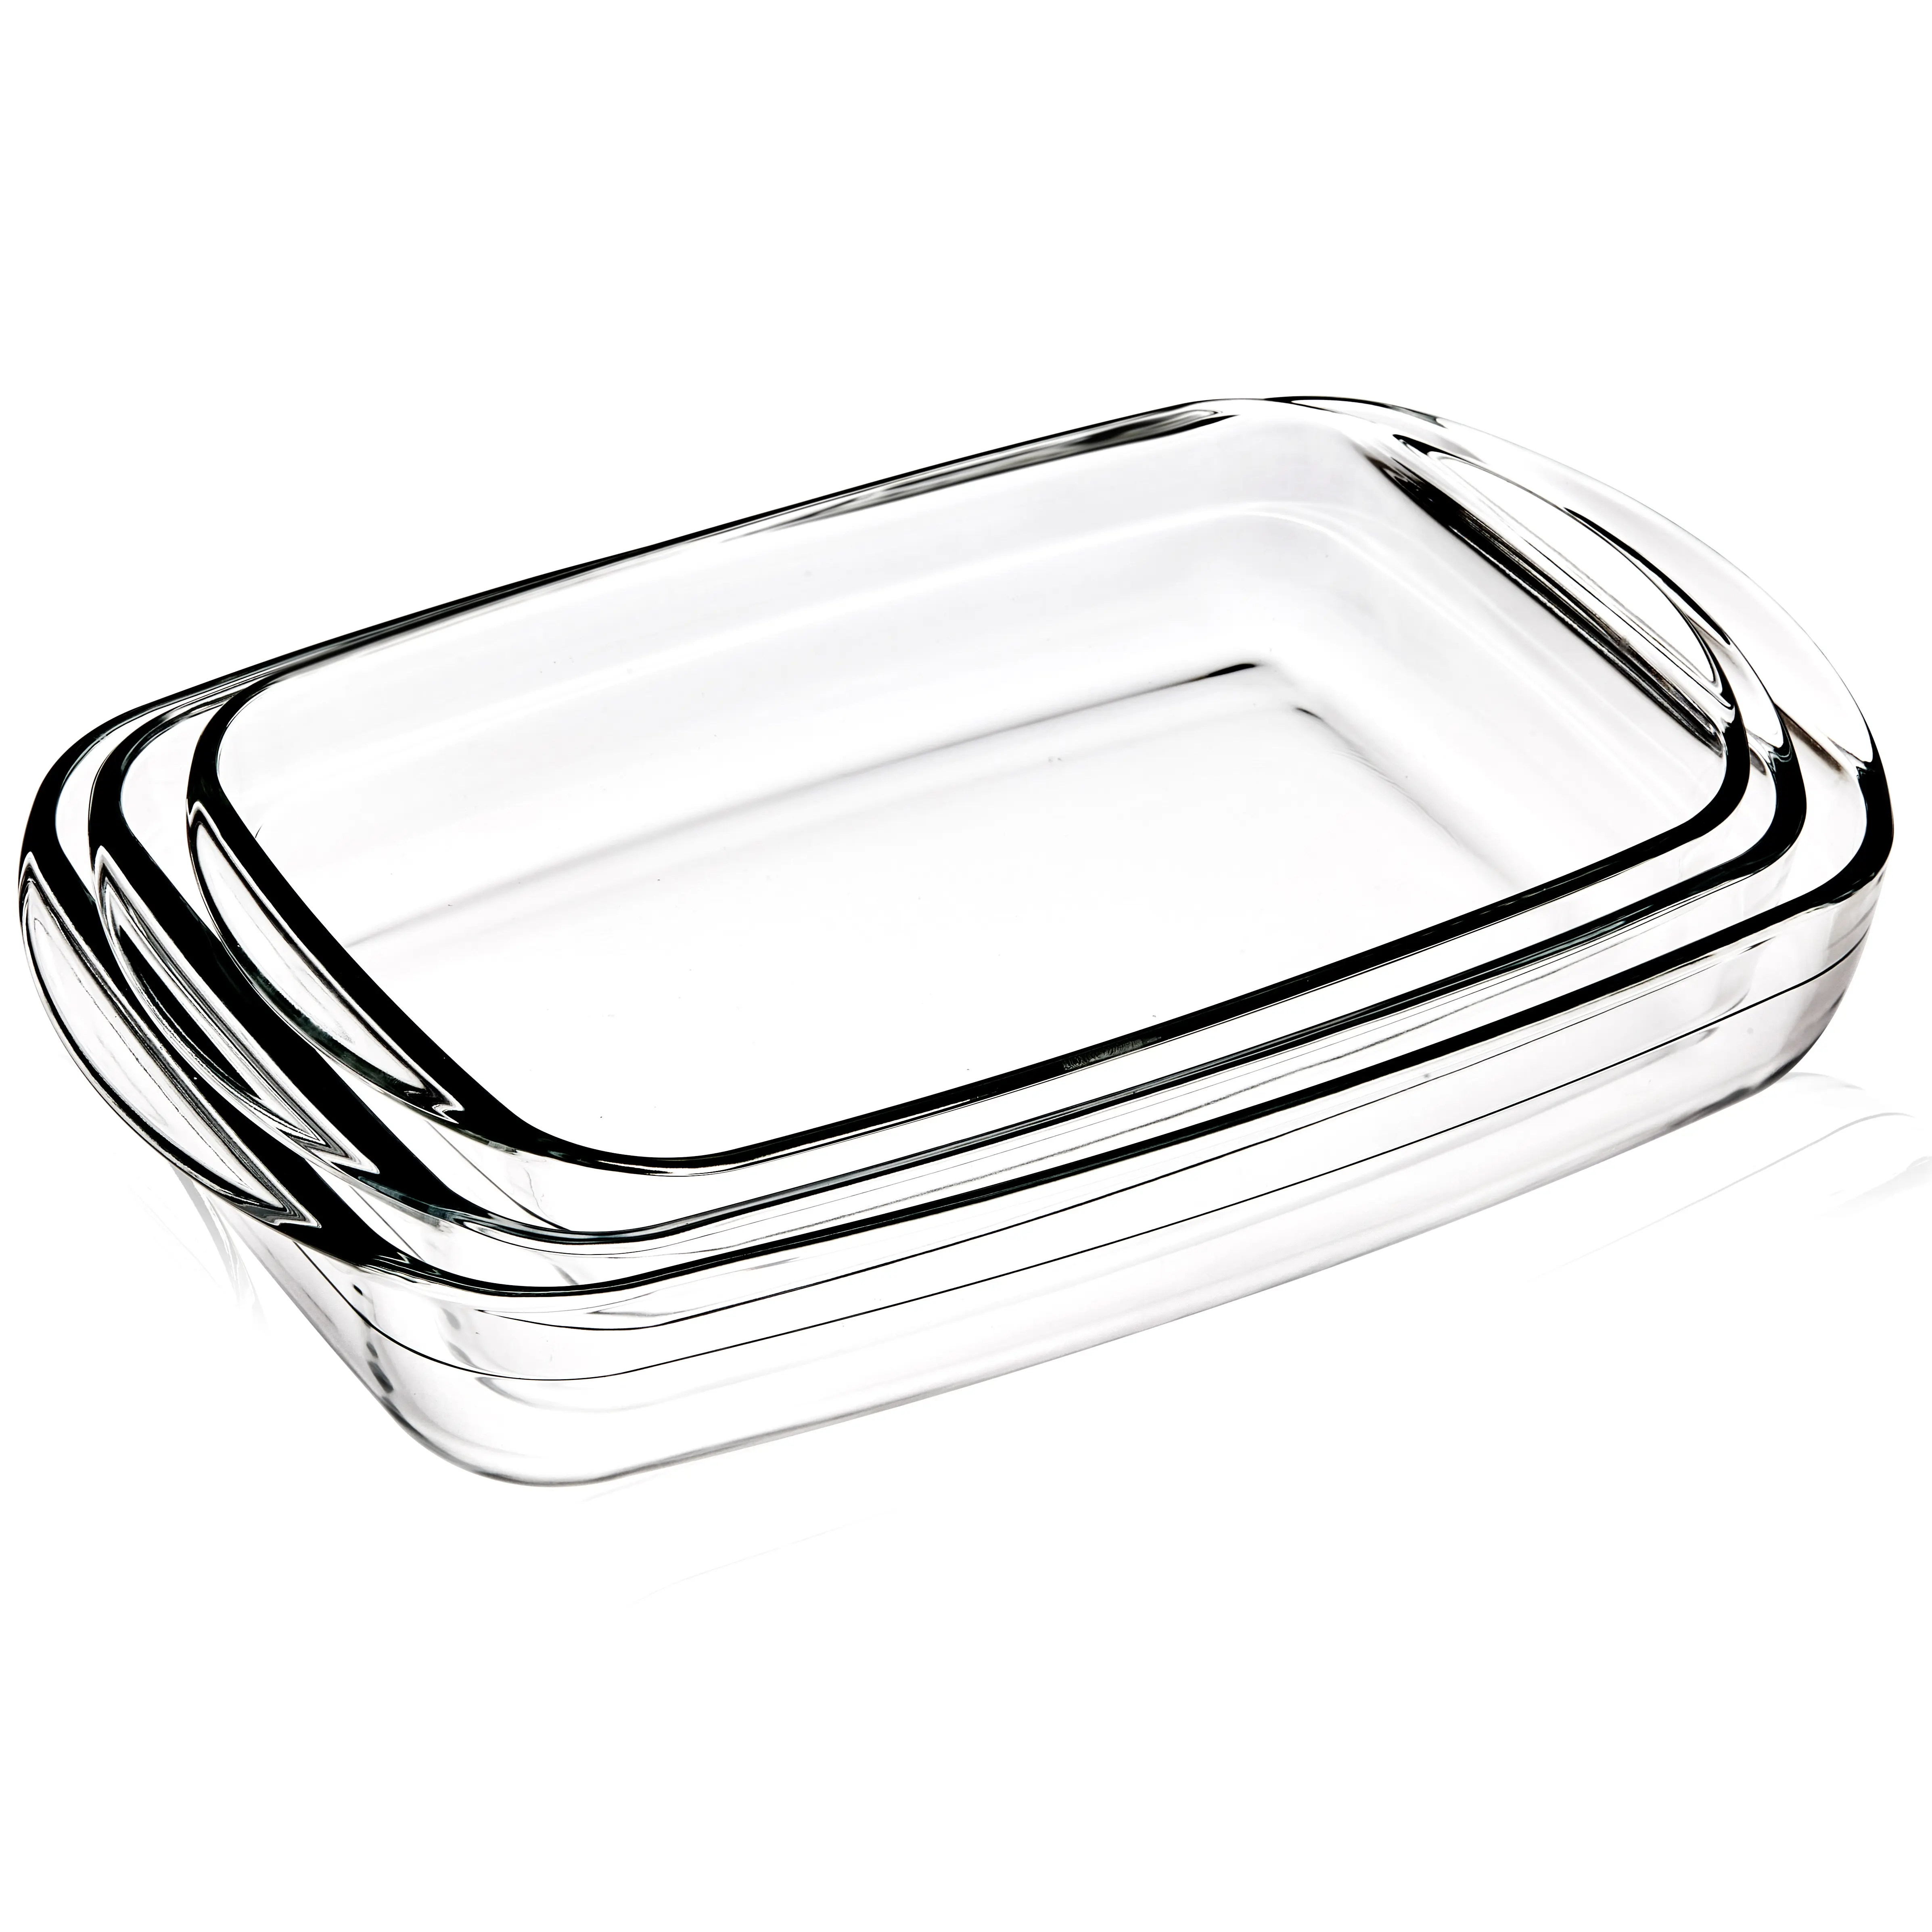 Linuo Factory Sale Oven Safe Glass Baking Dish Glass Baking Tray Baking Pan